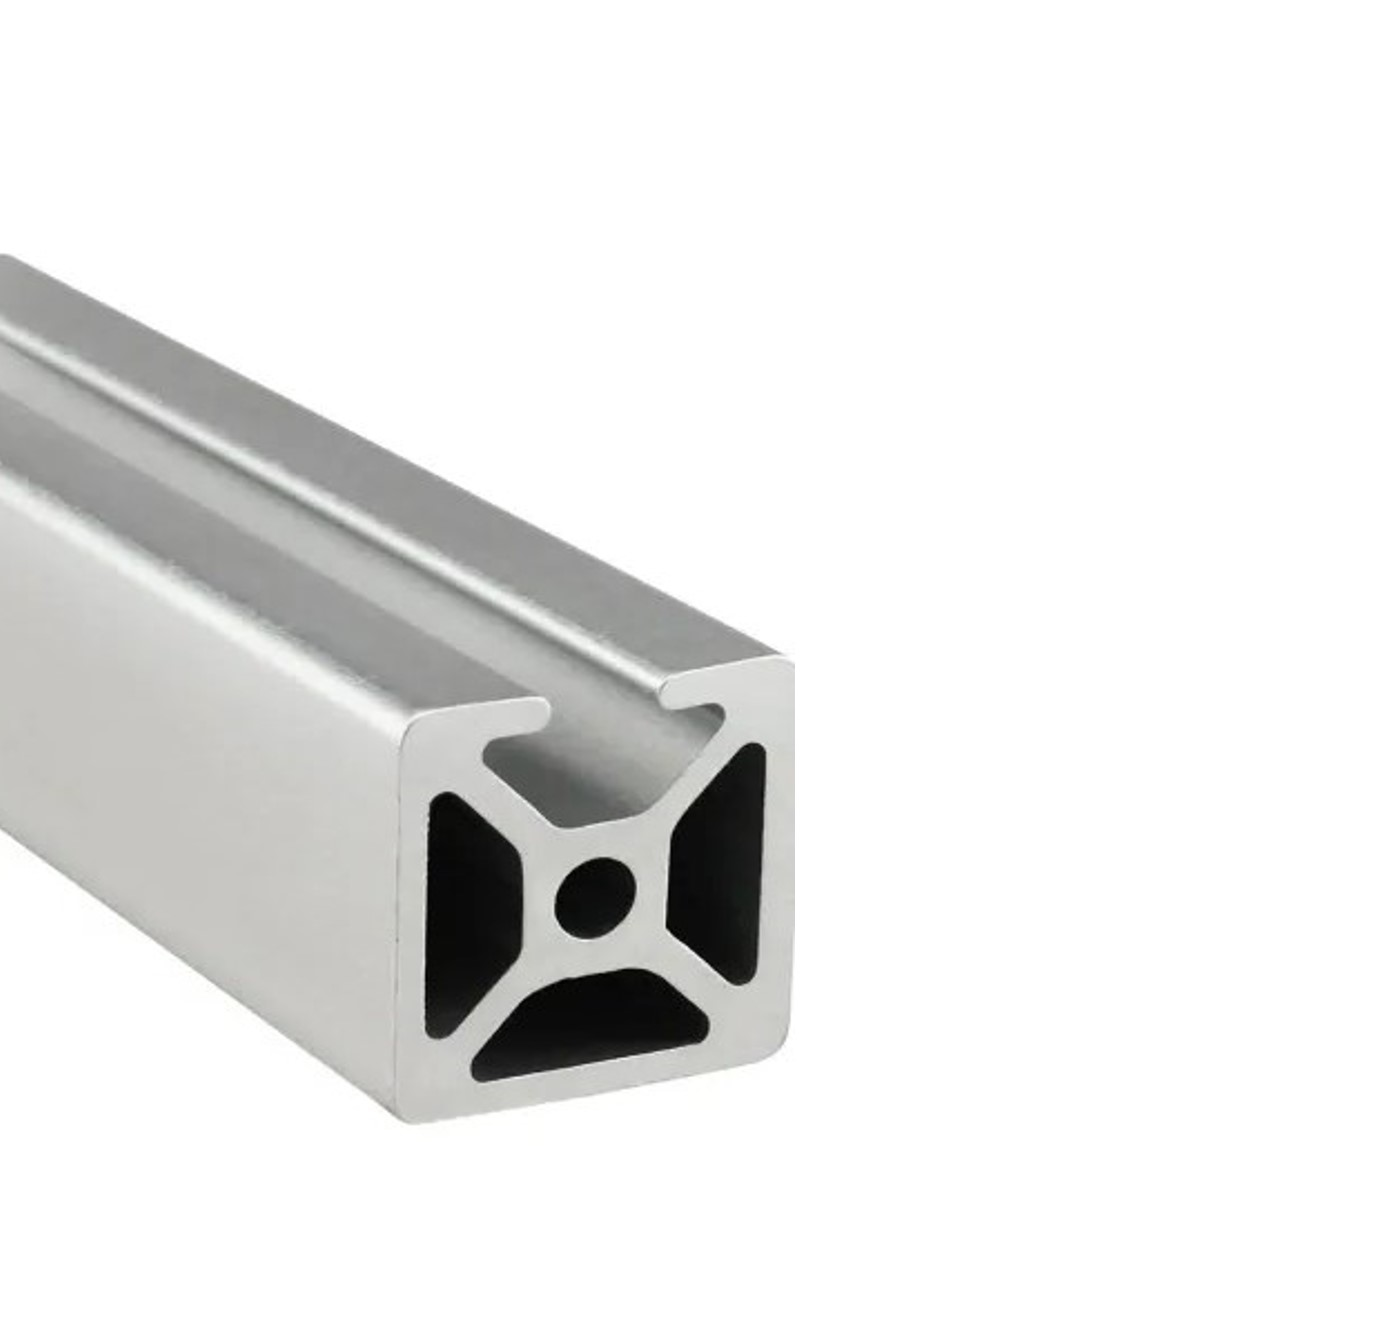 1" X 1" Smooth Mono T-Slotted Aluminum - 10 Series